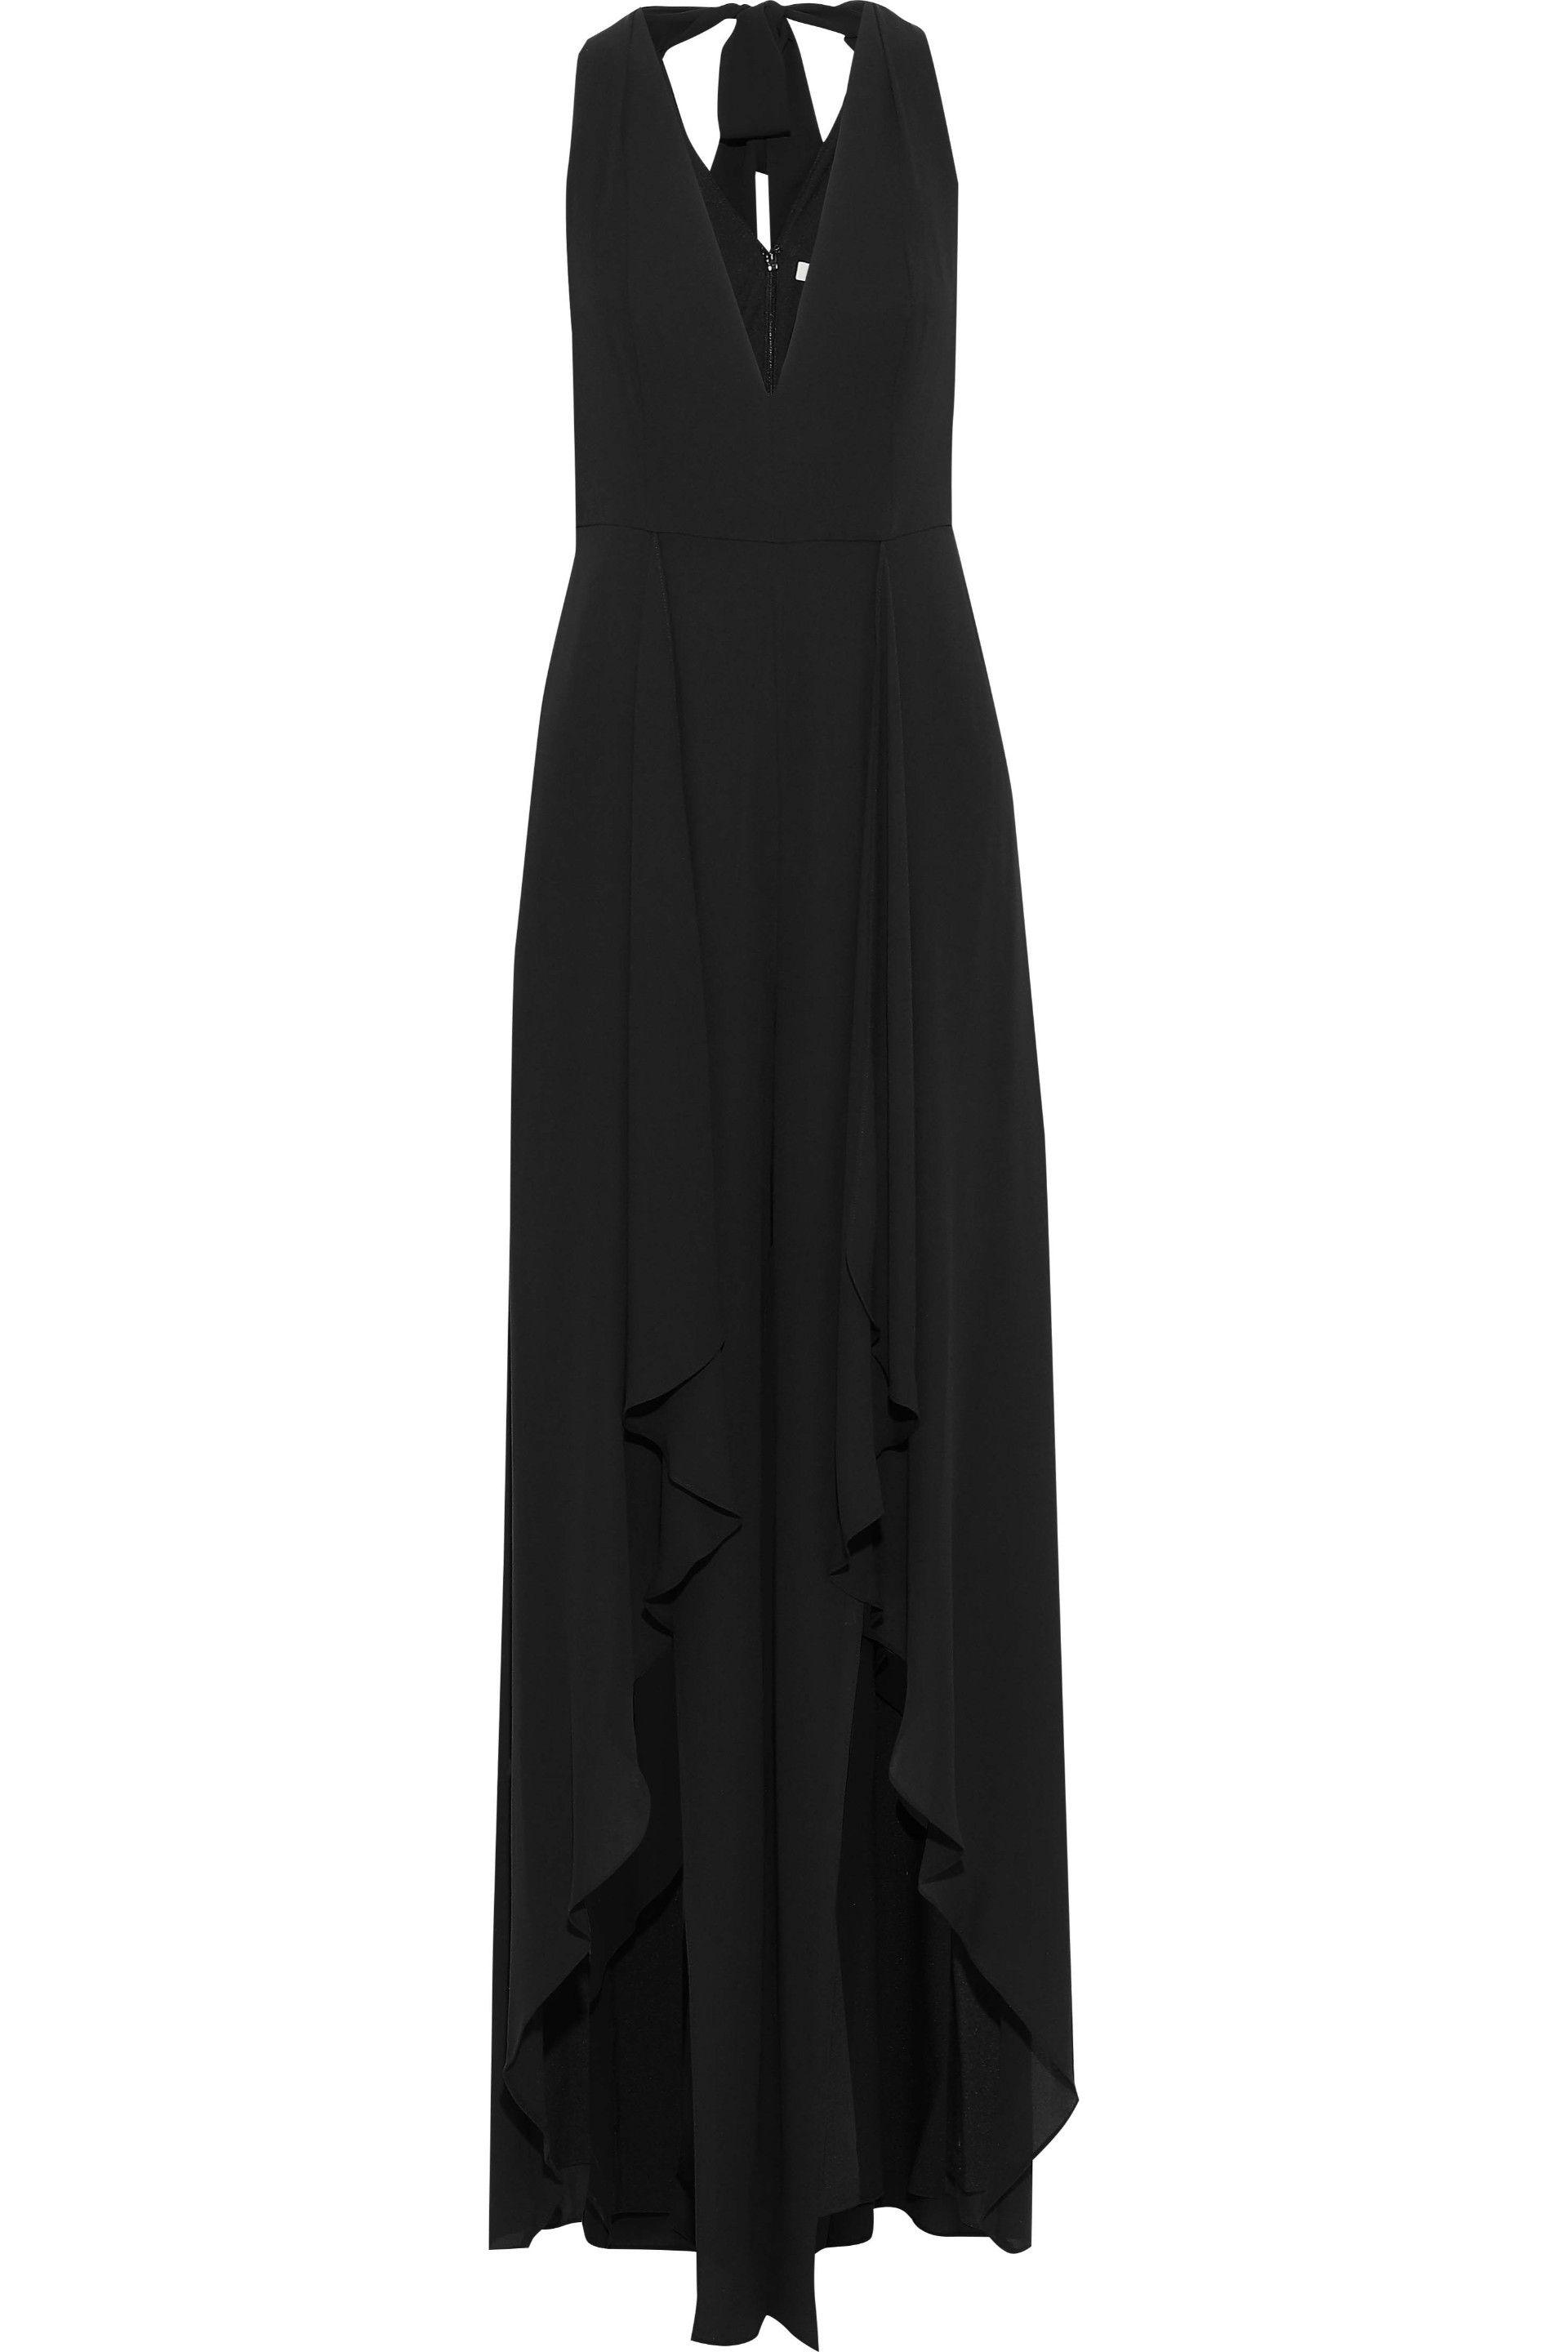 Halston Synthetic Layered Crepe Jumpsuit Black - Lyst